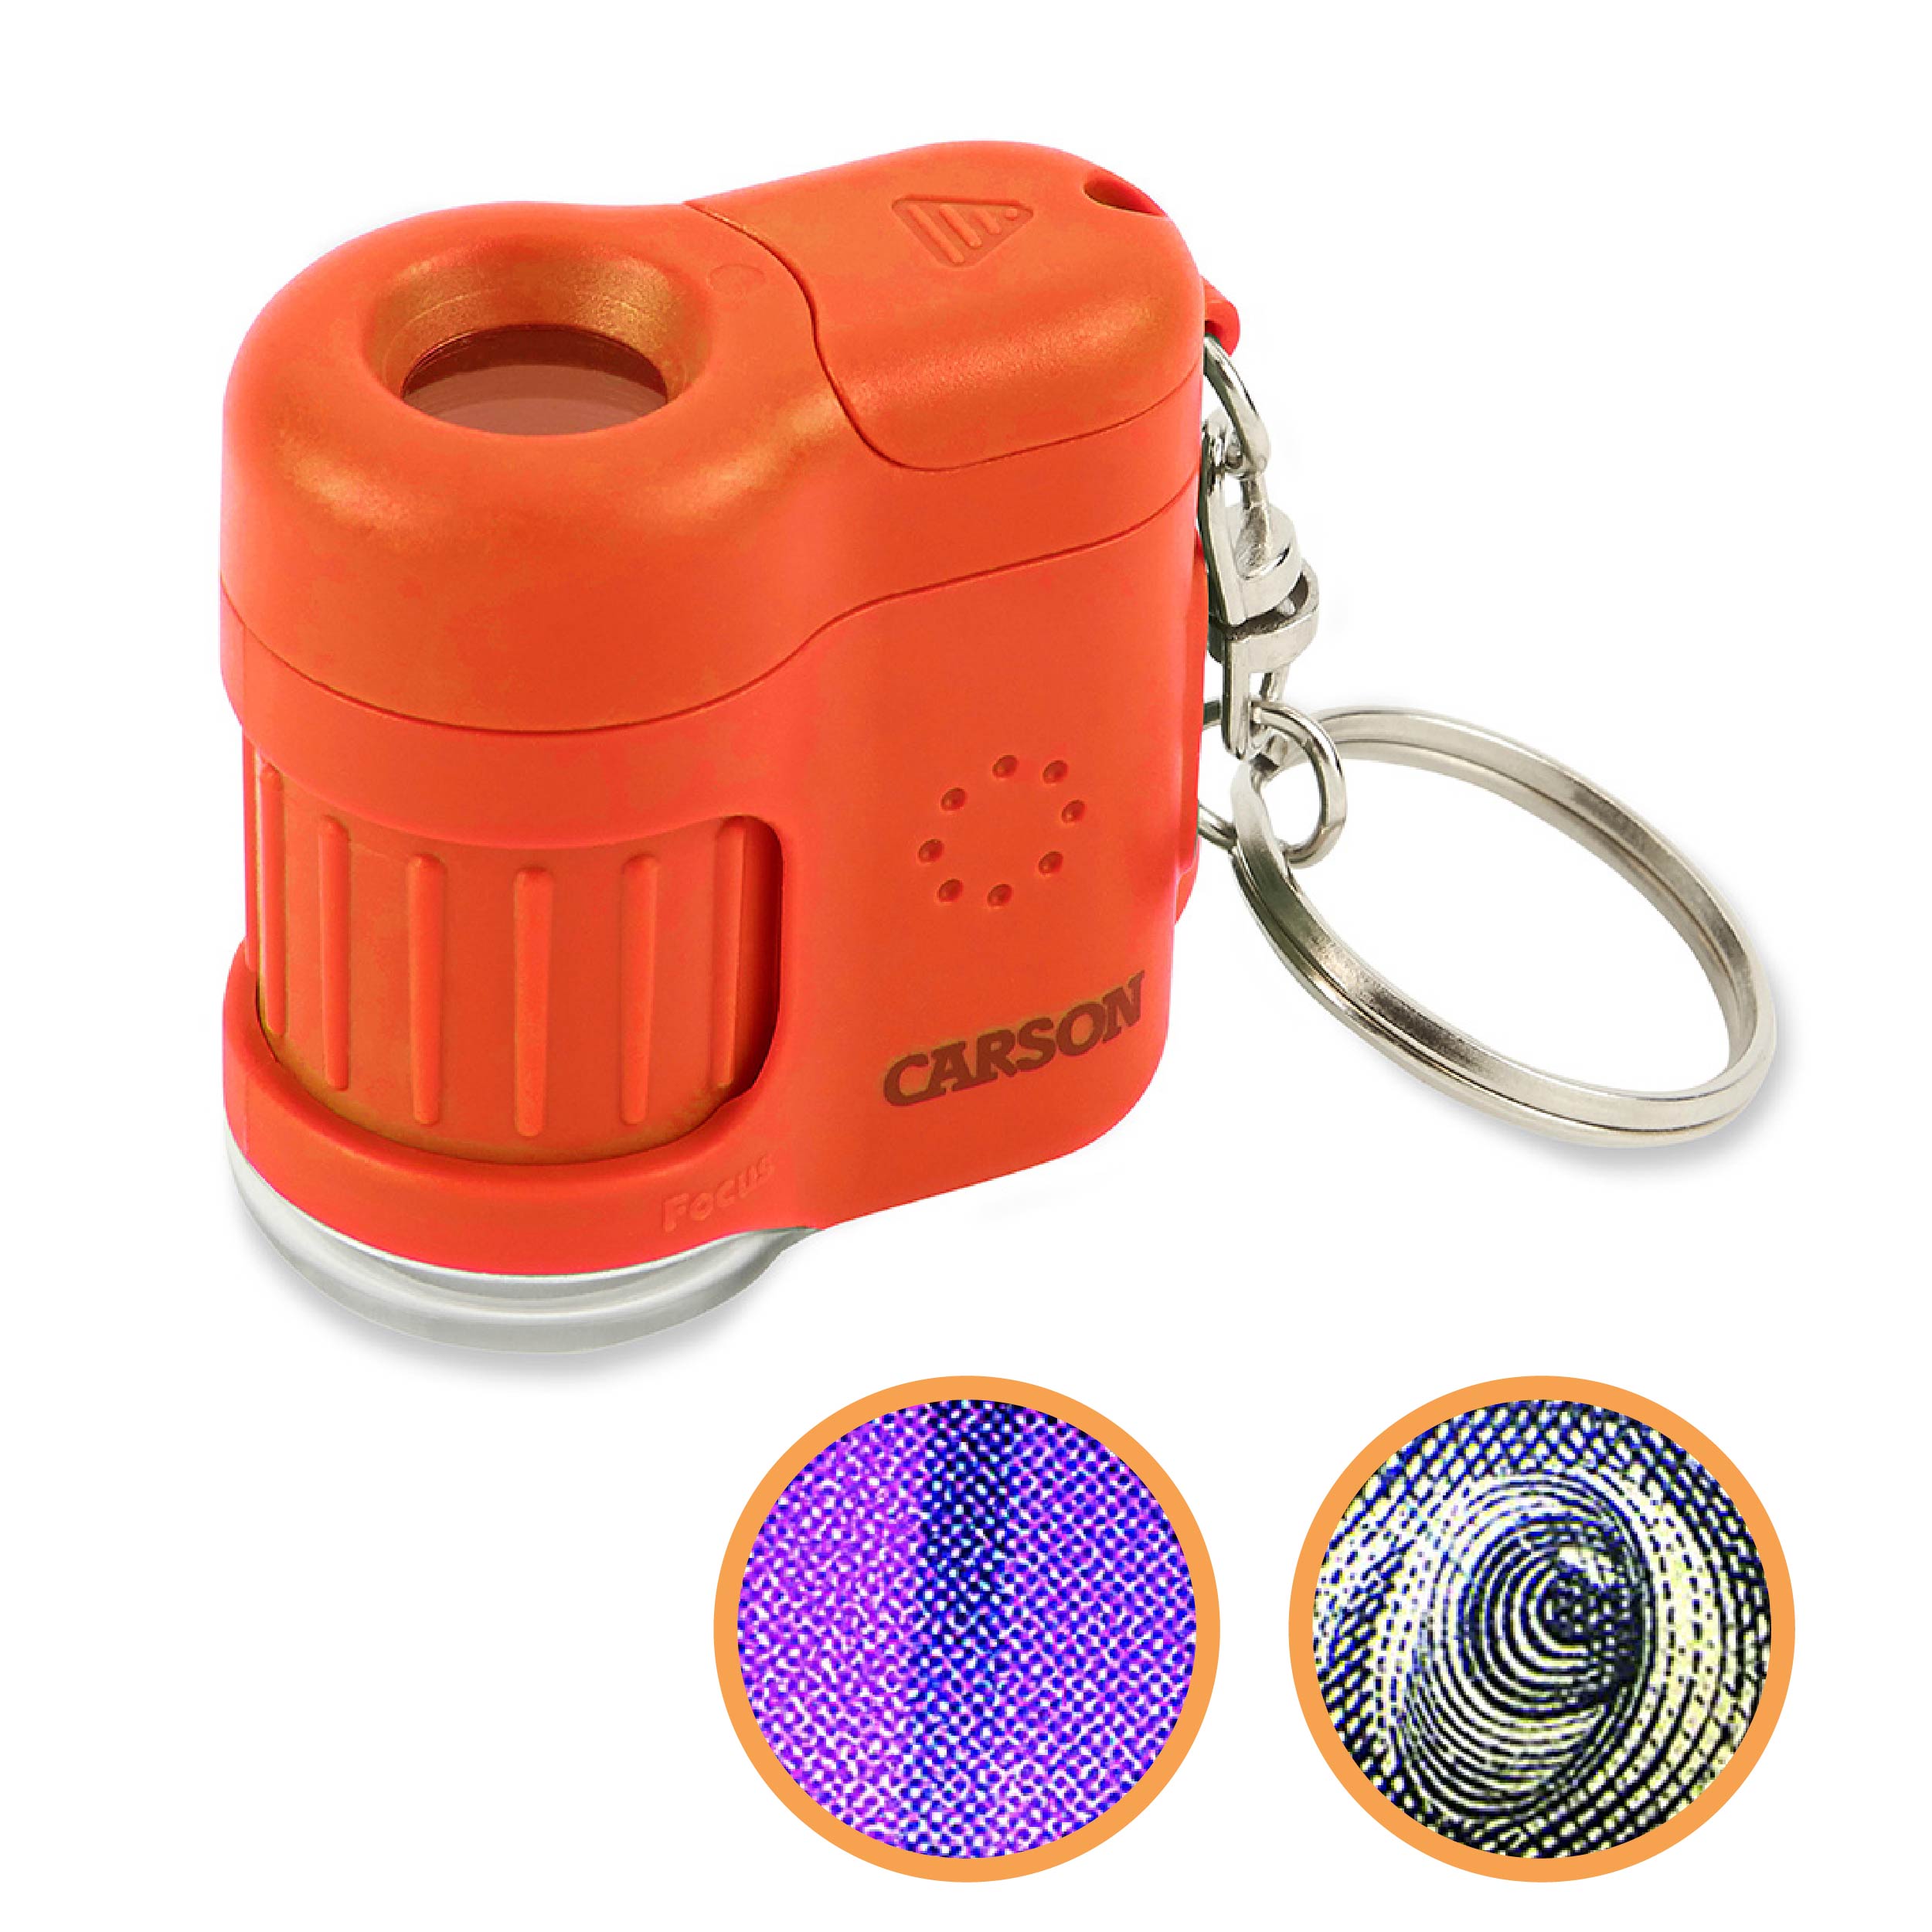 Carson MicroMini™ 20x LED Lighted Pocket Microscope with Built-In UV and LED Flashlight, Orange - image 1 of 9